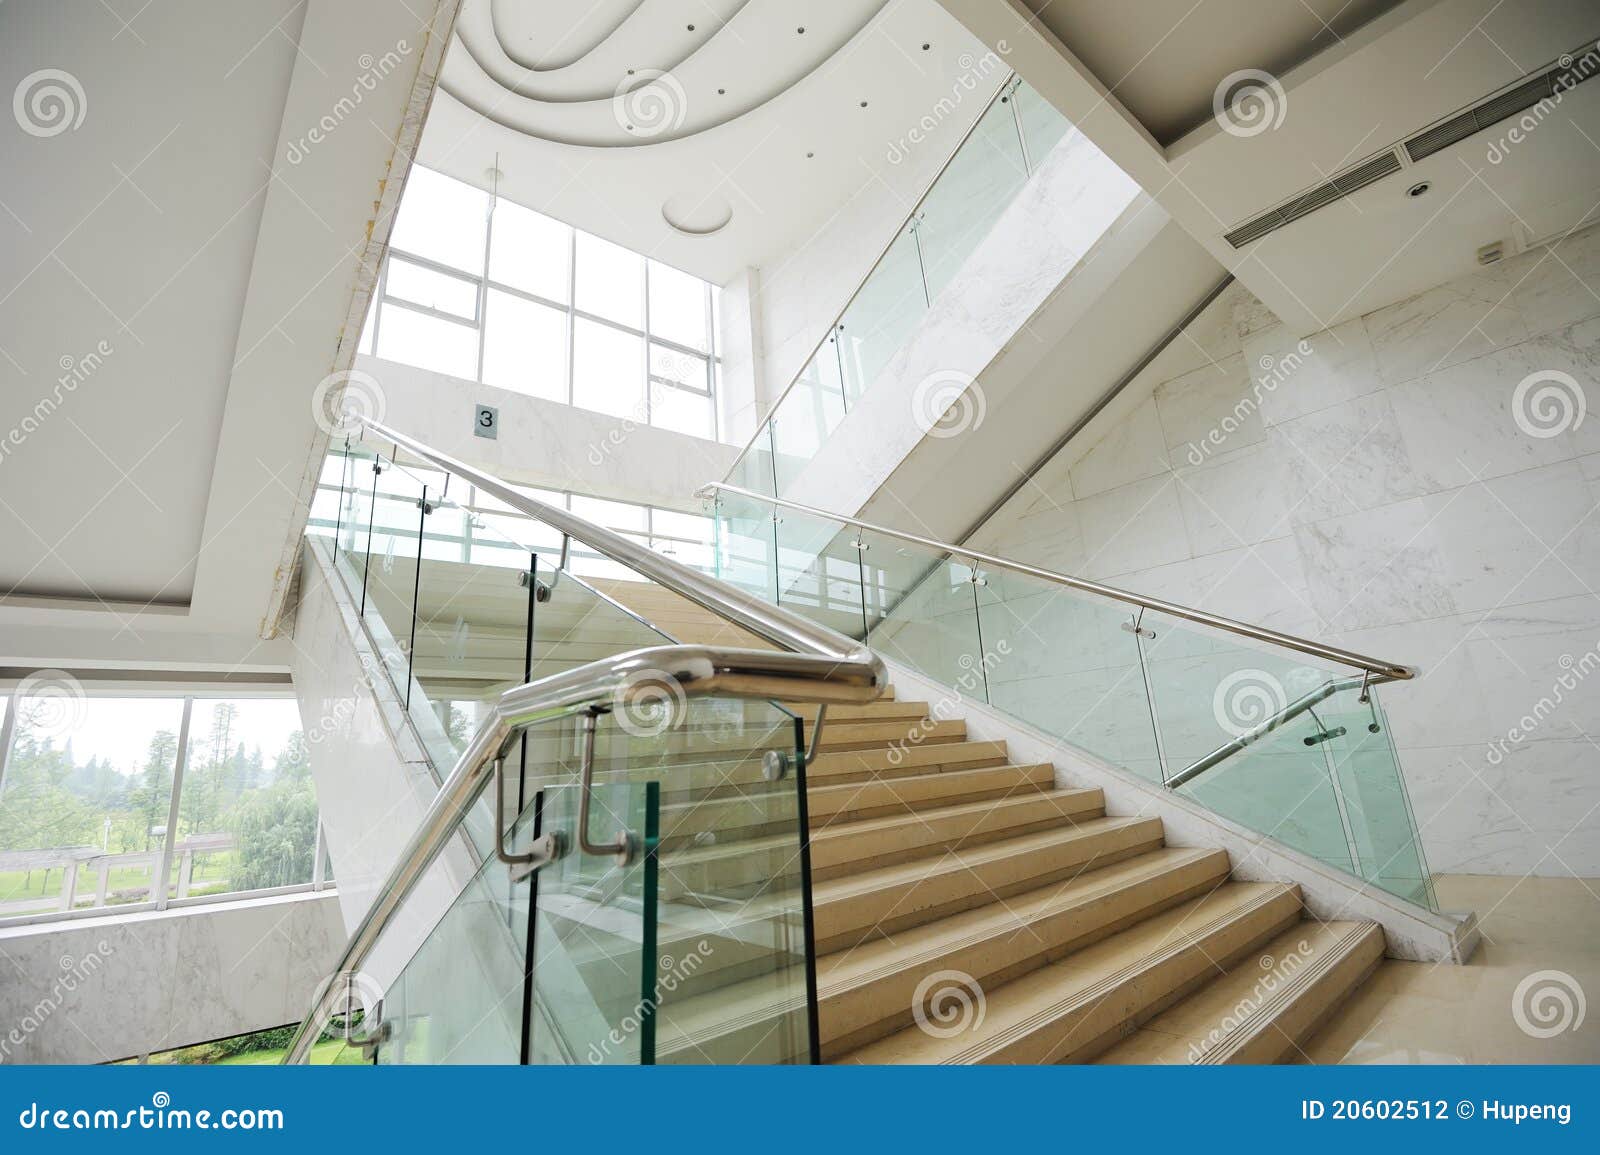 Stairs in the hotel stock photo. Image of holiday, clean - 20602512